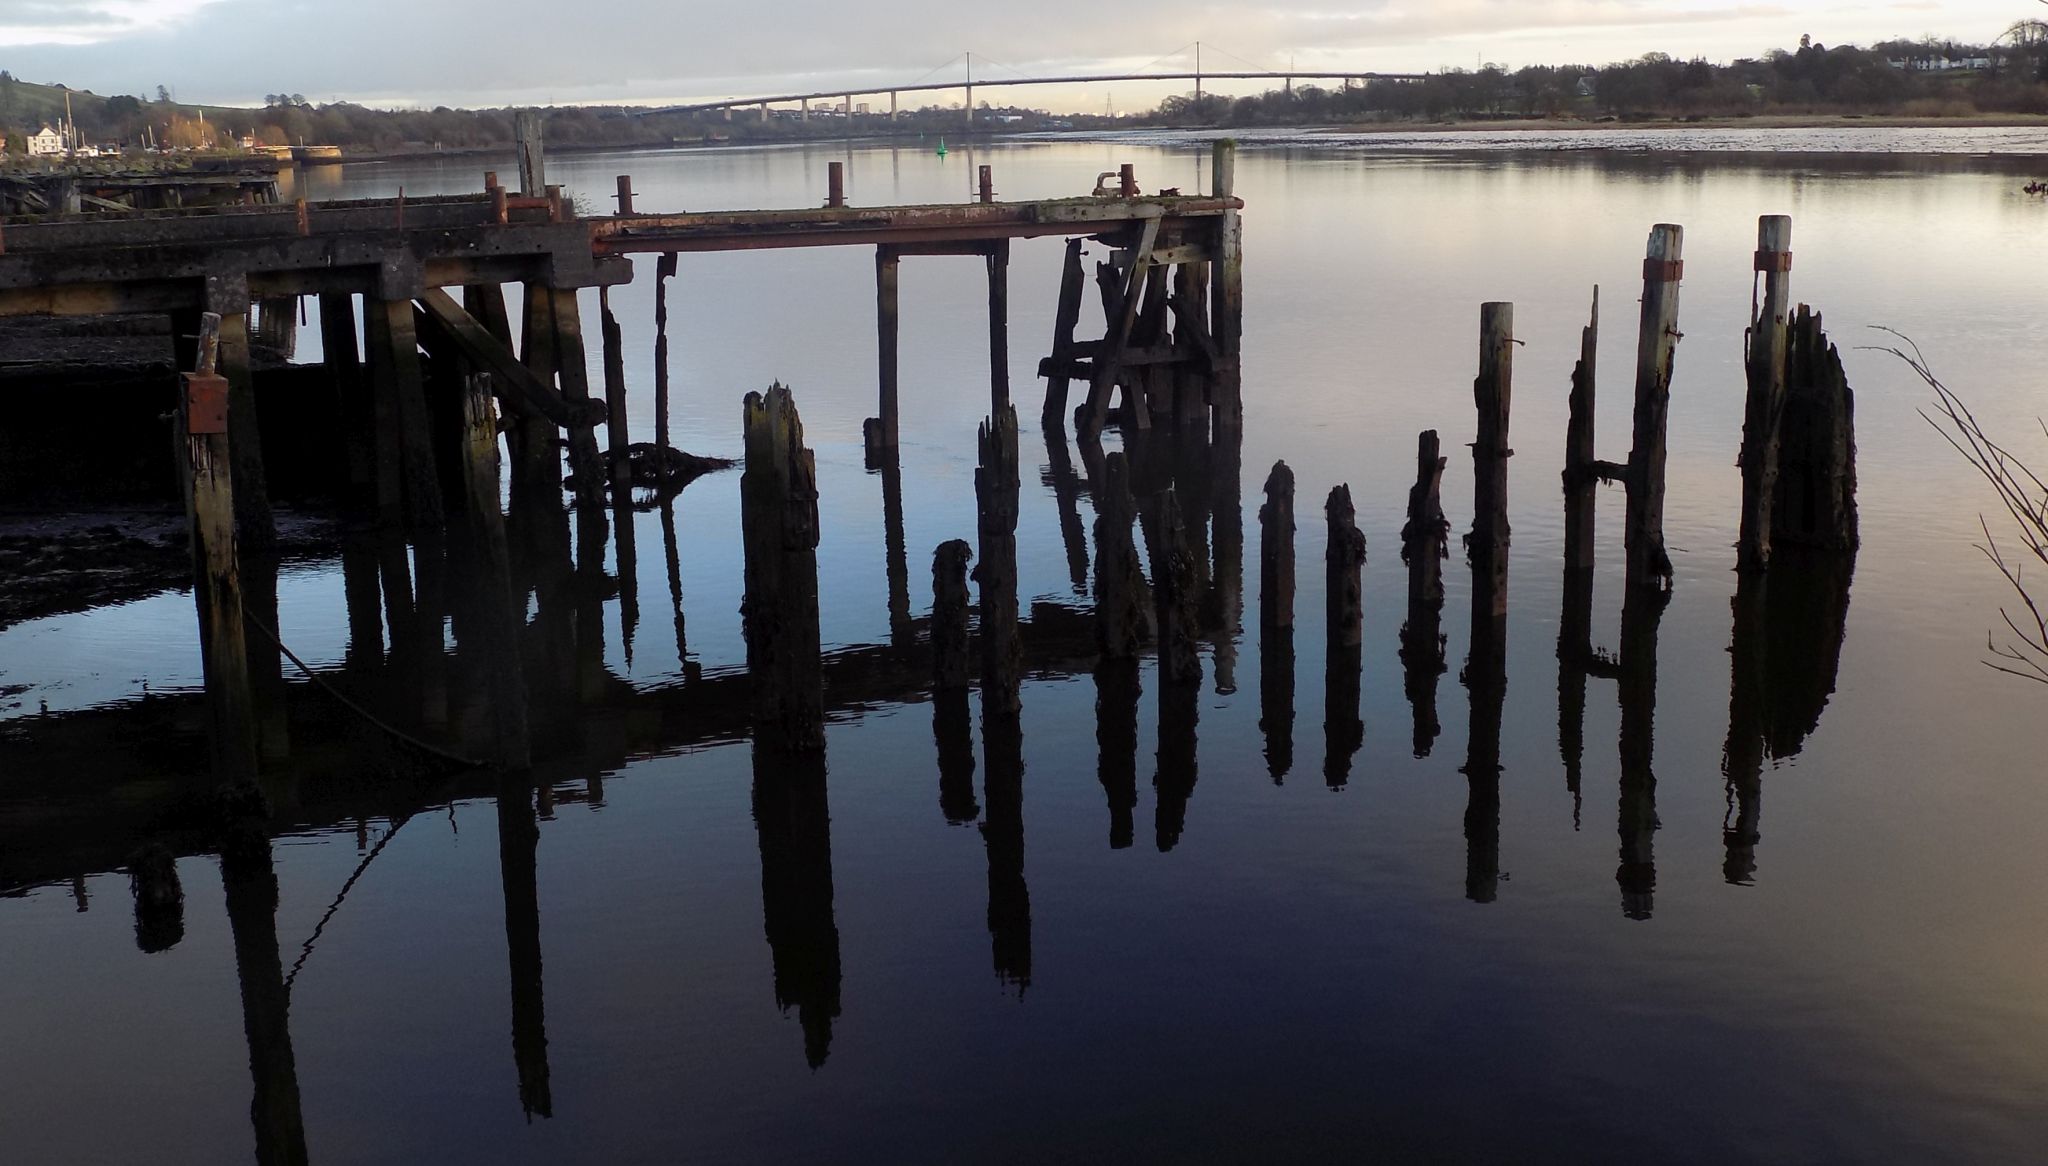 Old docks at Bowling on the Firth of Clyde